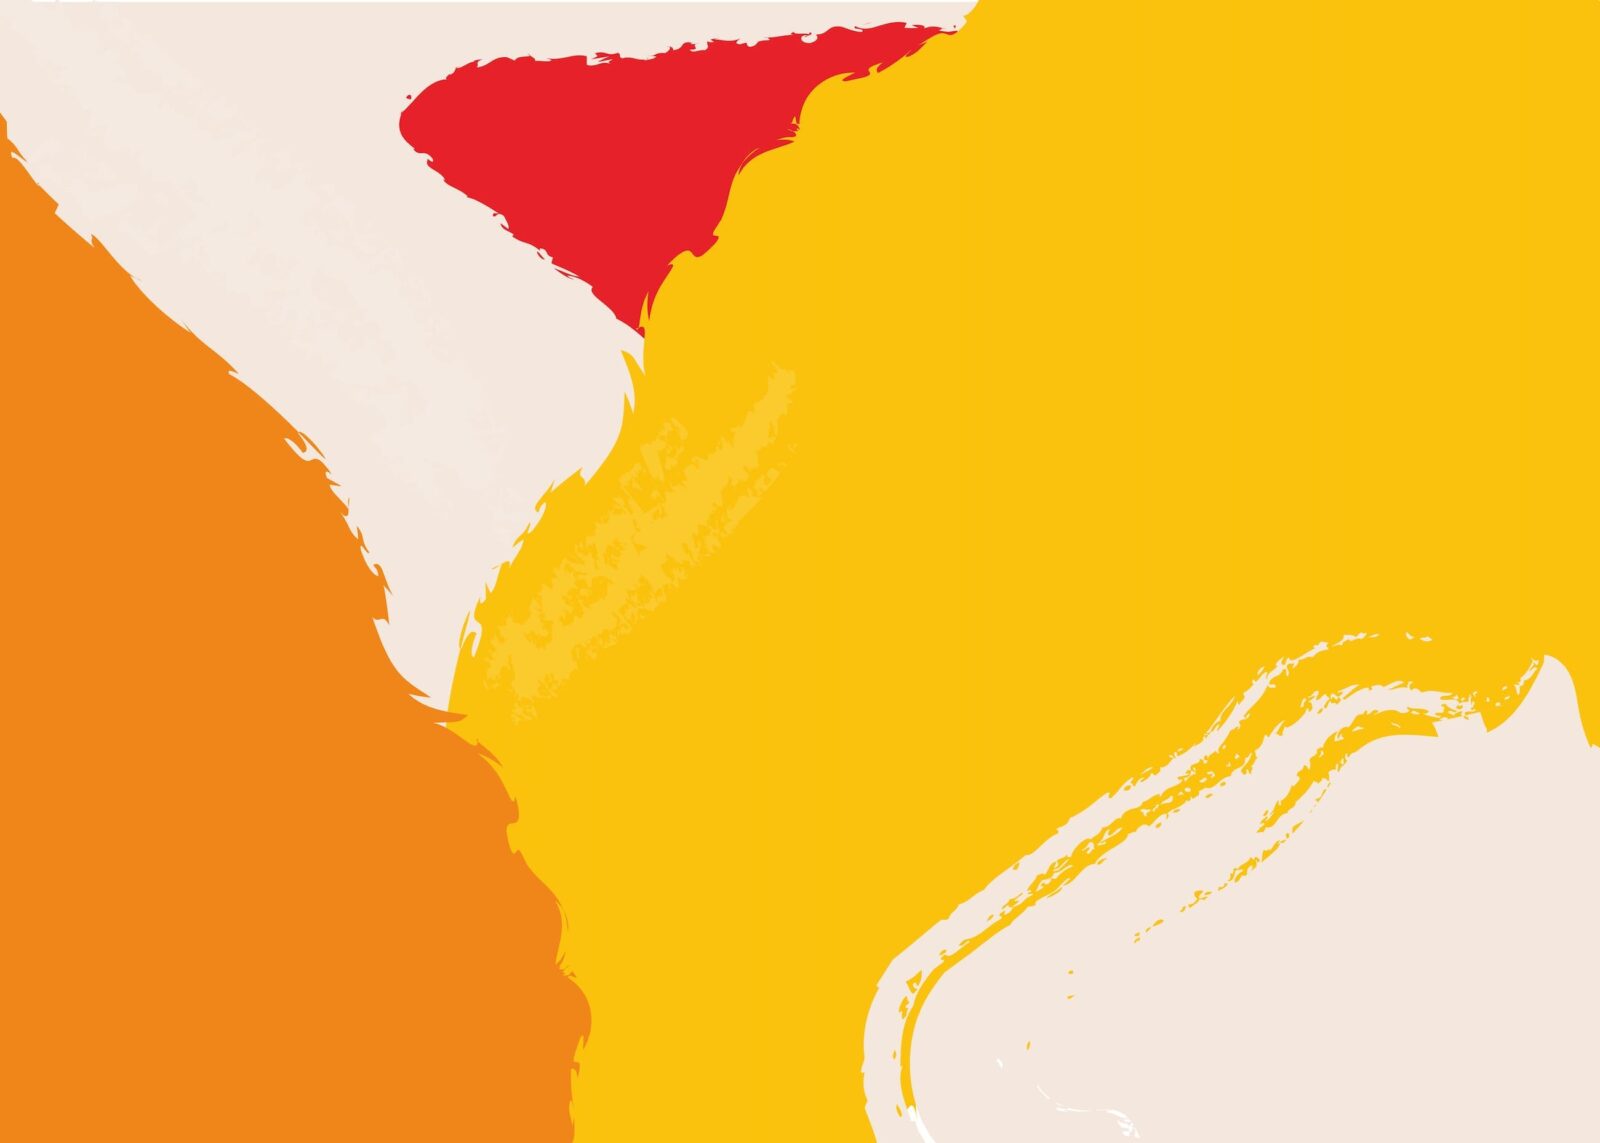 An abstract design with bright yellow, red, and orange shapes against a pale peach background.